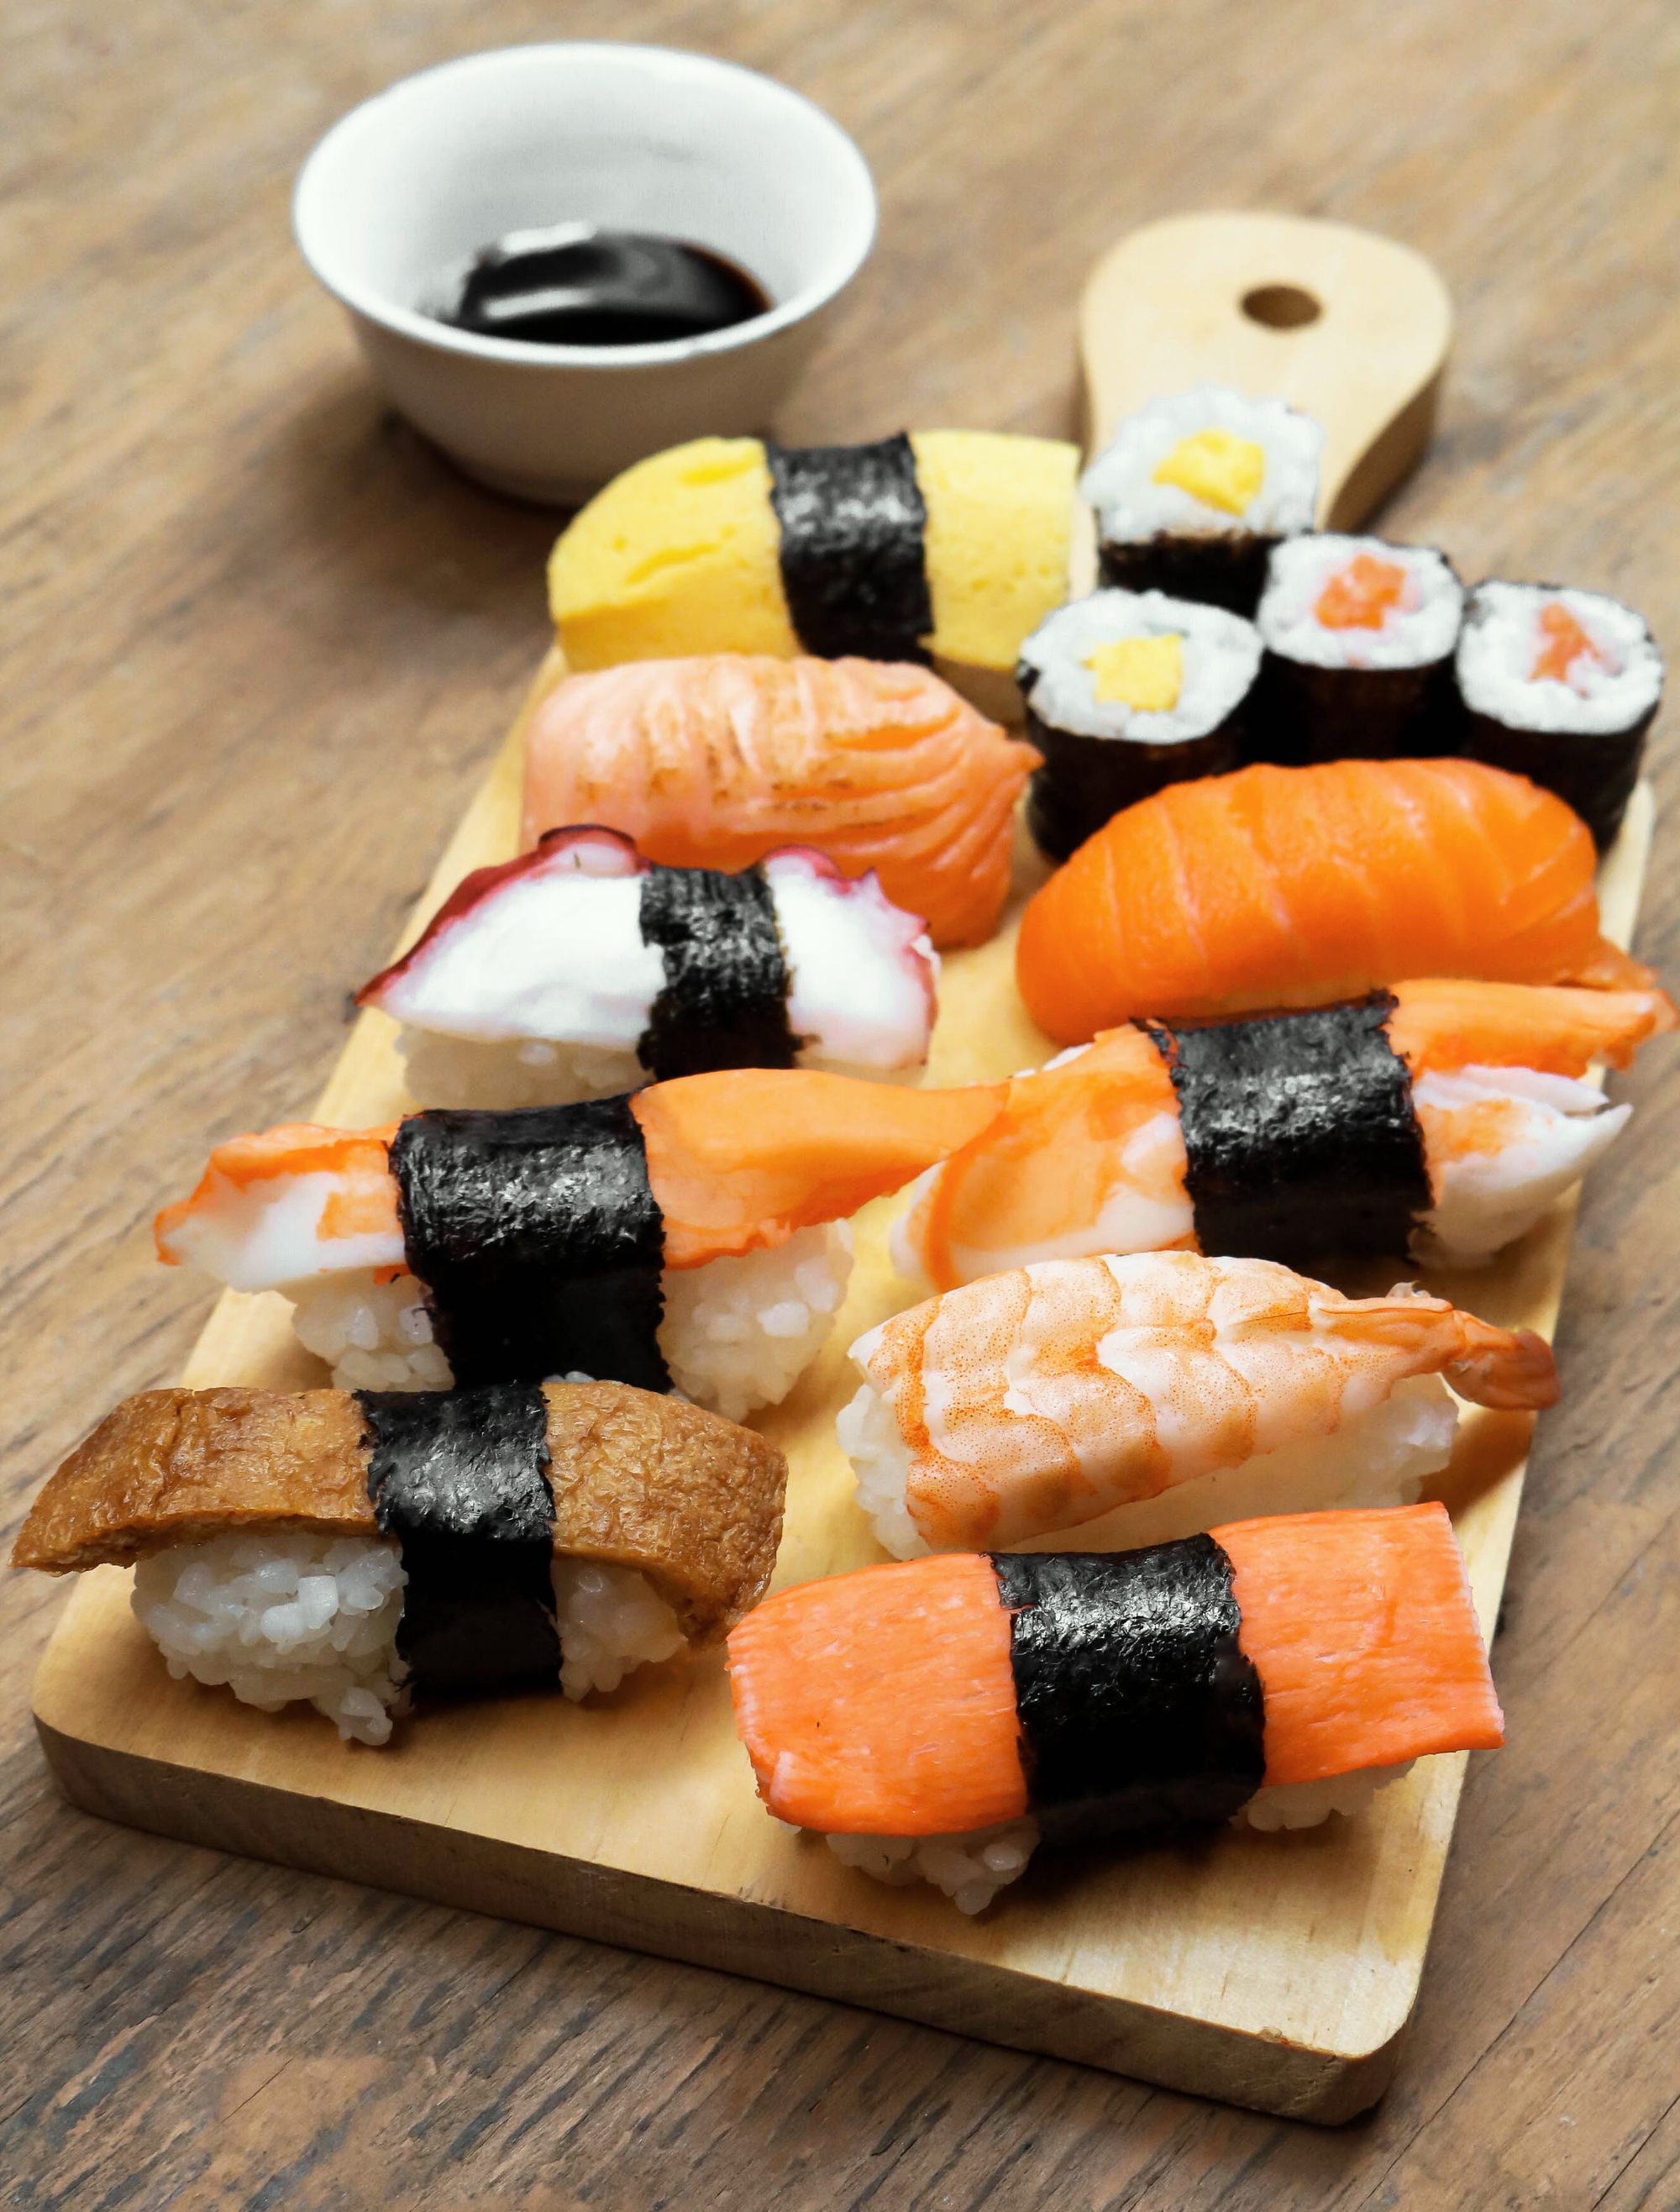 Japan’s 7 most dangerous culinary experiences